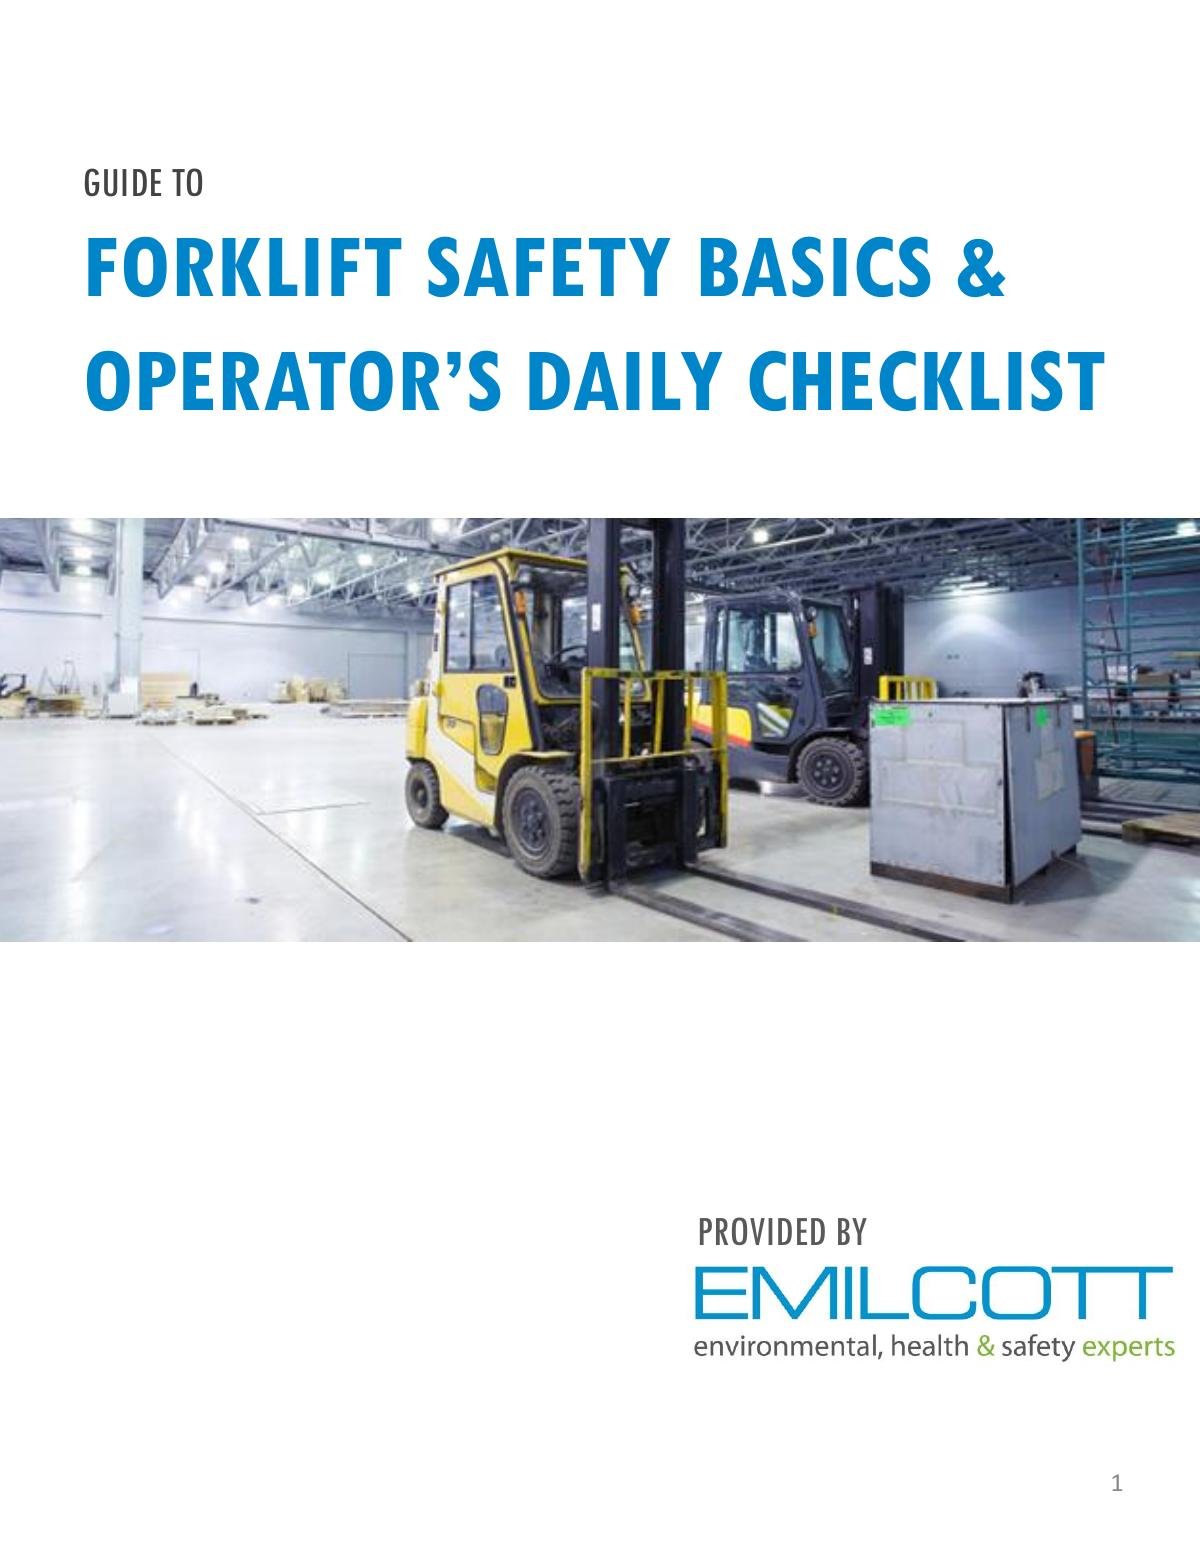 Guide to Forklift Safety Basics and Daily Operator's Checklist